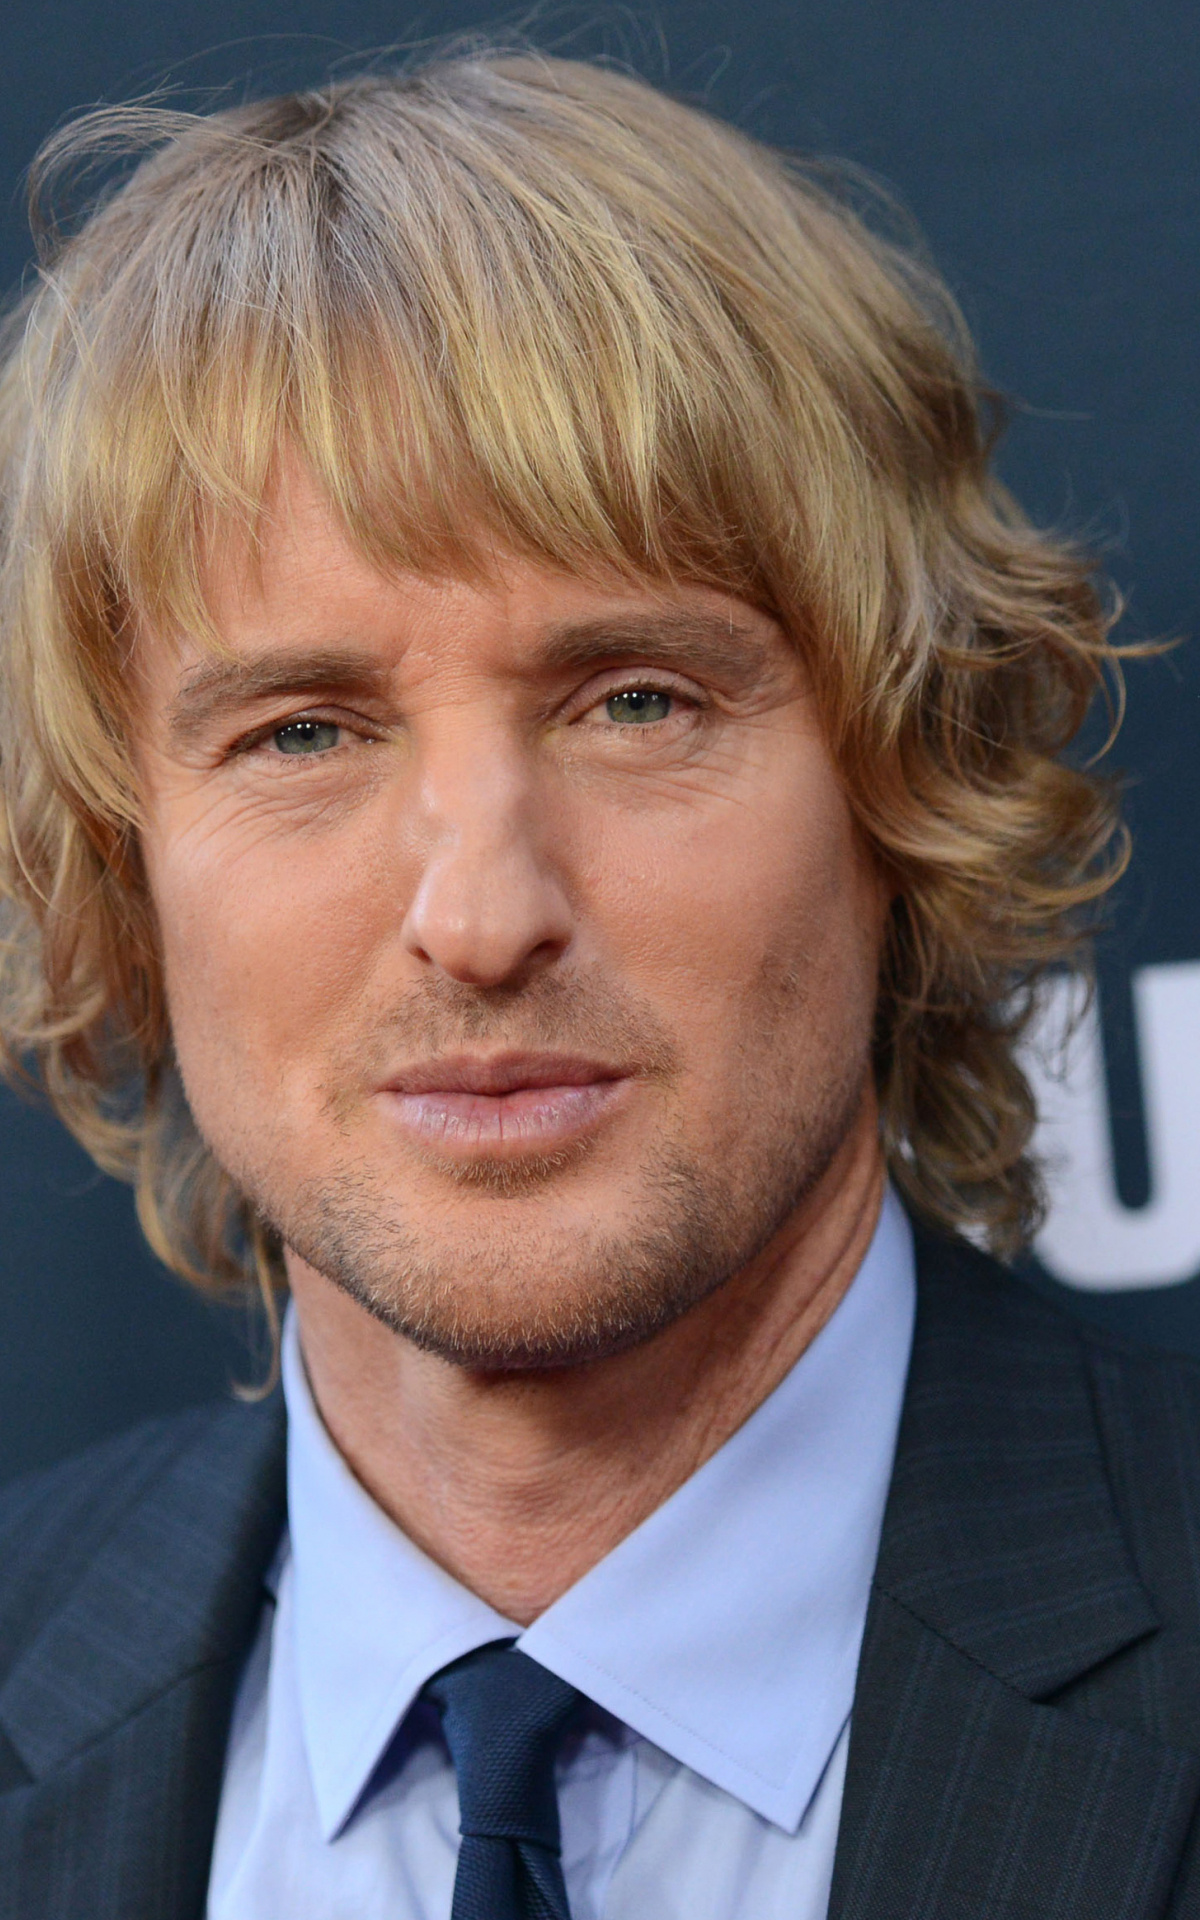 Owen Wilson: His most famous films include Shanghai Noon (2000), Zoolander (2001), Starsky and Hutch (2004), Celebrity. 1200x1920 HD Background.